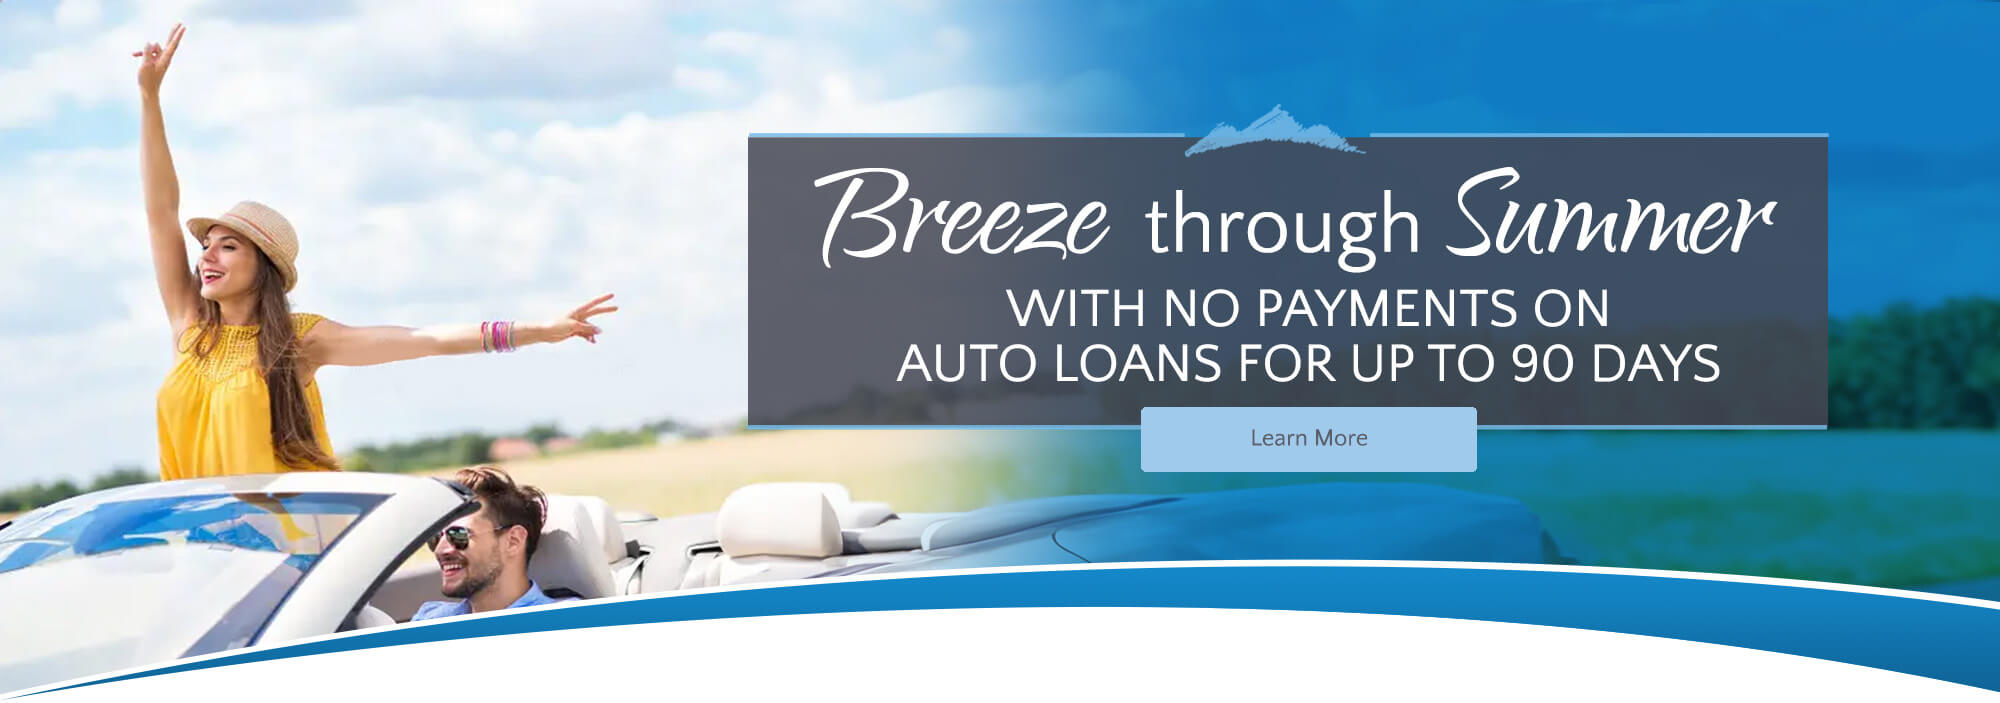 Breeze through summer with no payments on auto loans for up to 90 days. Click to learn more.